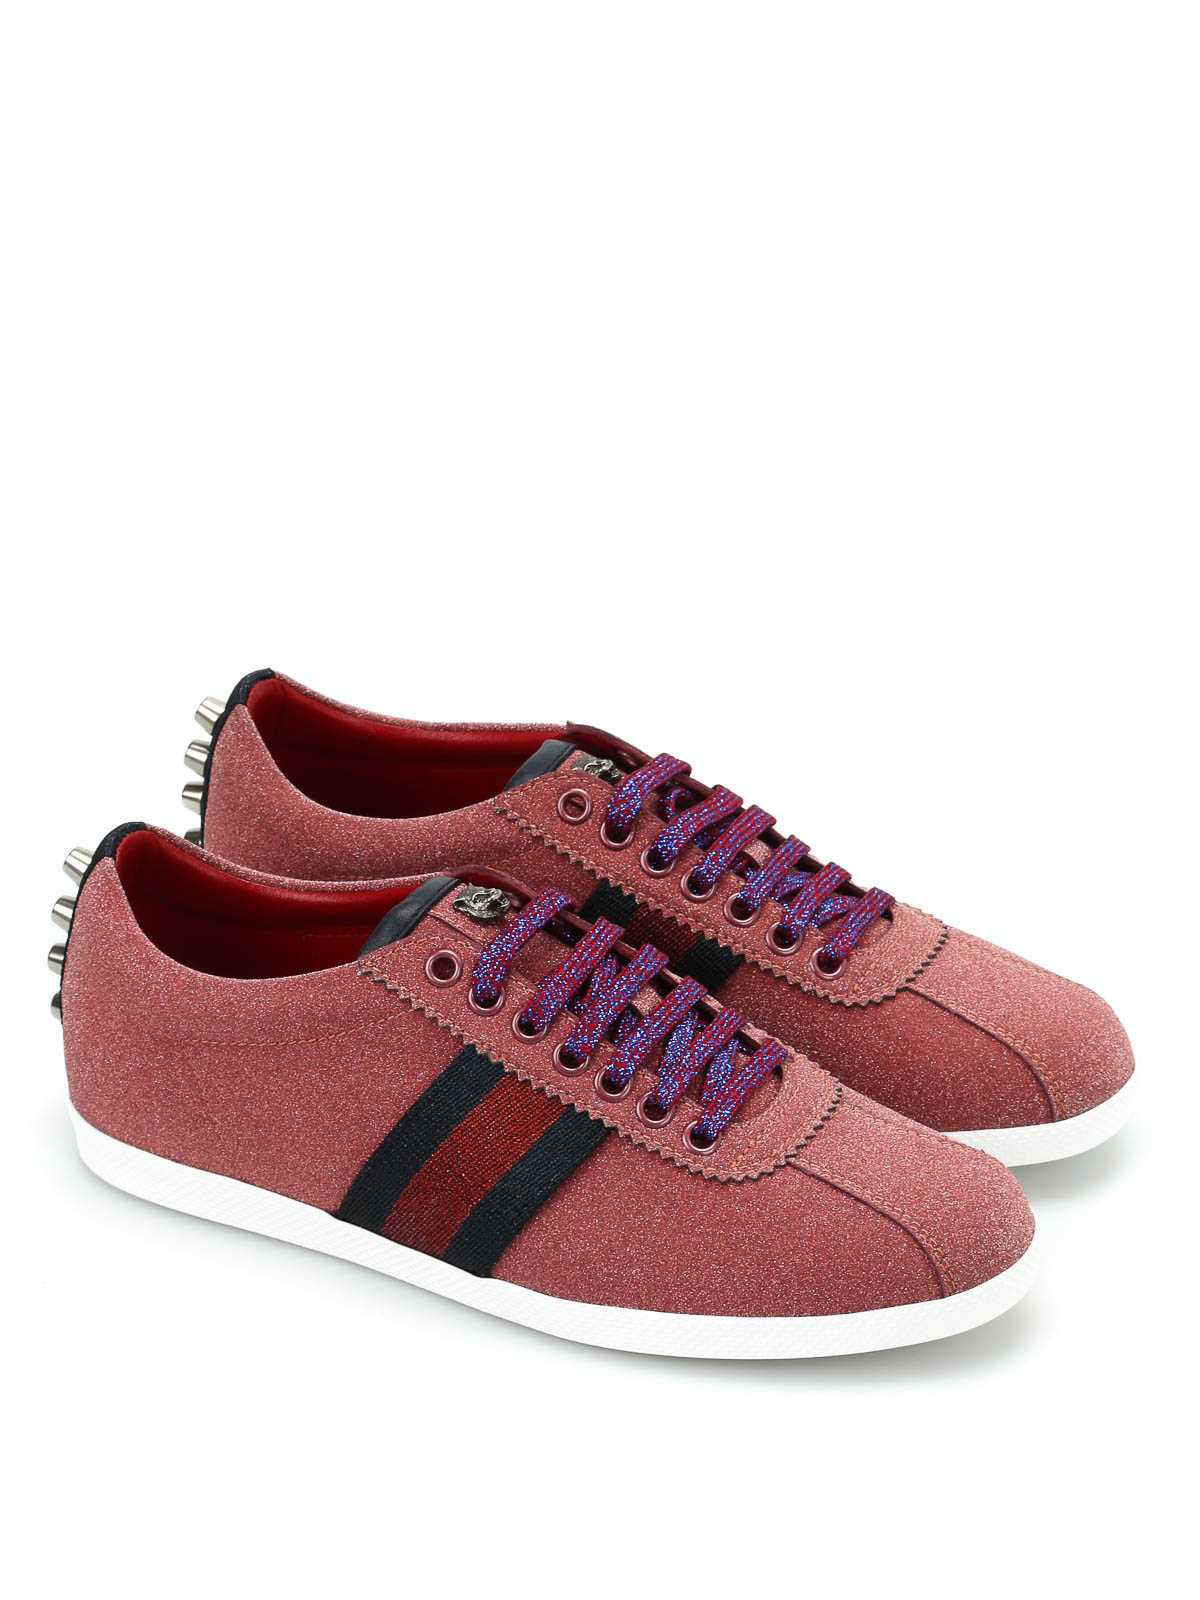 red gucci trainers